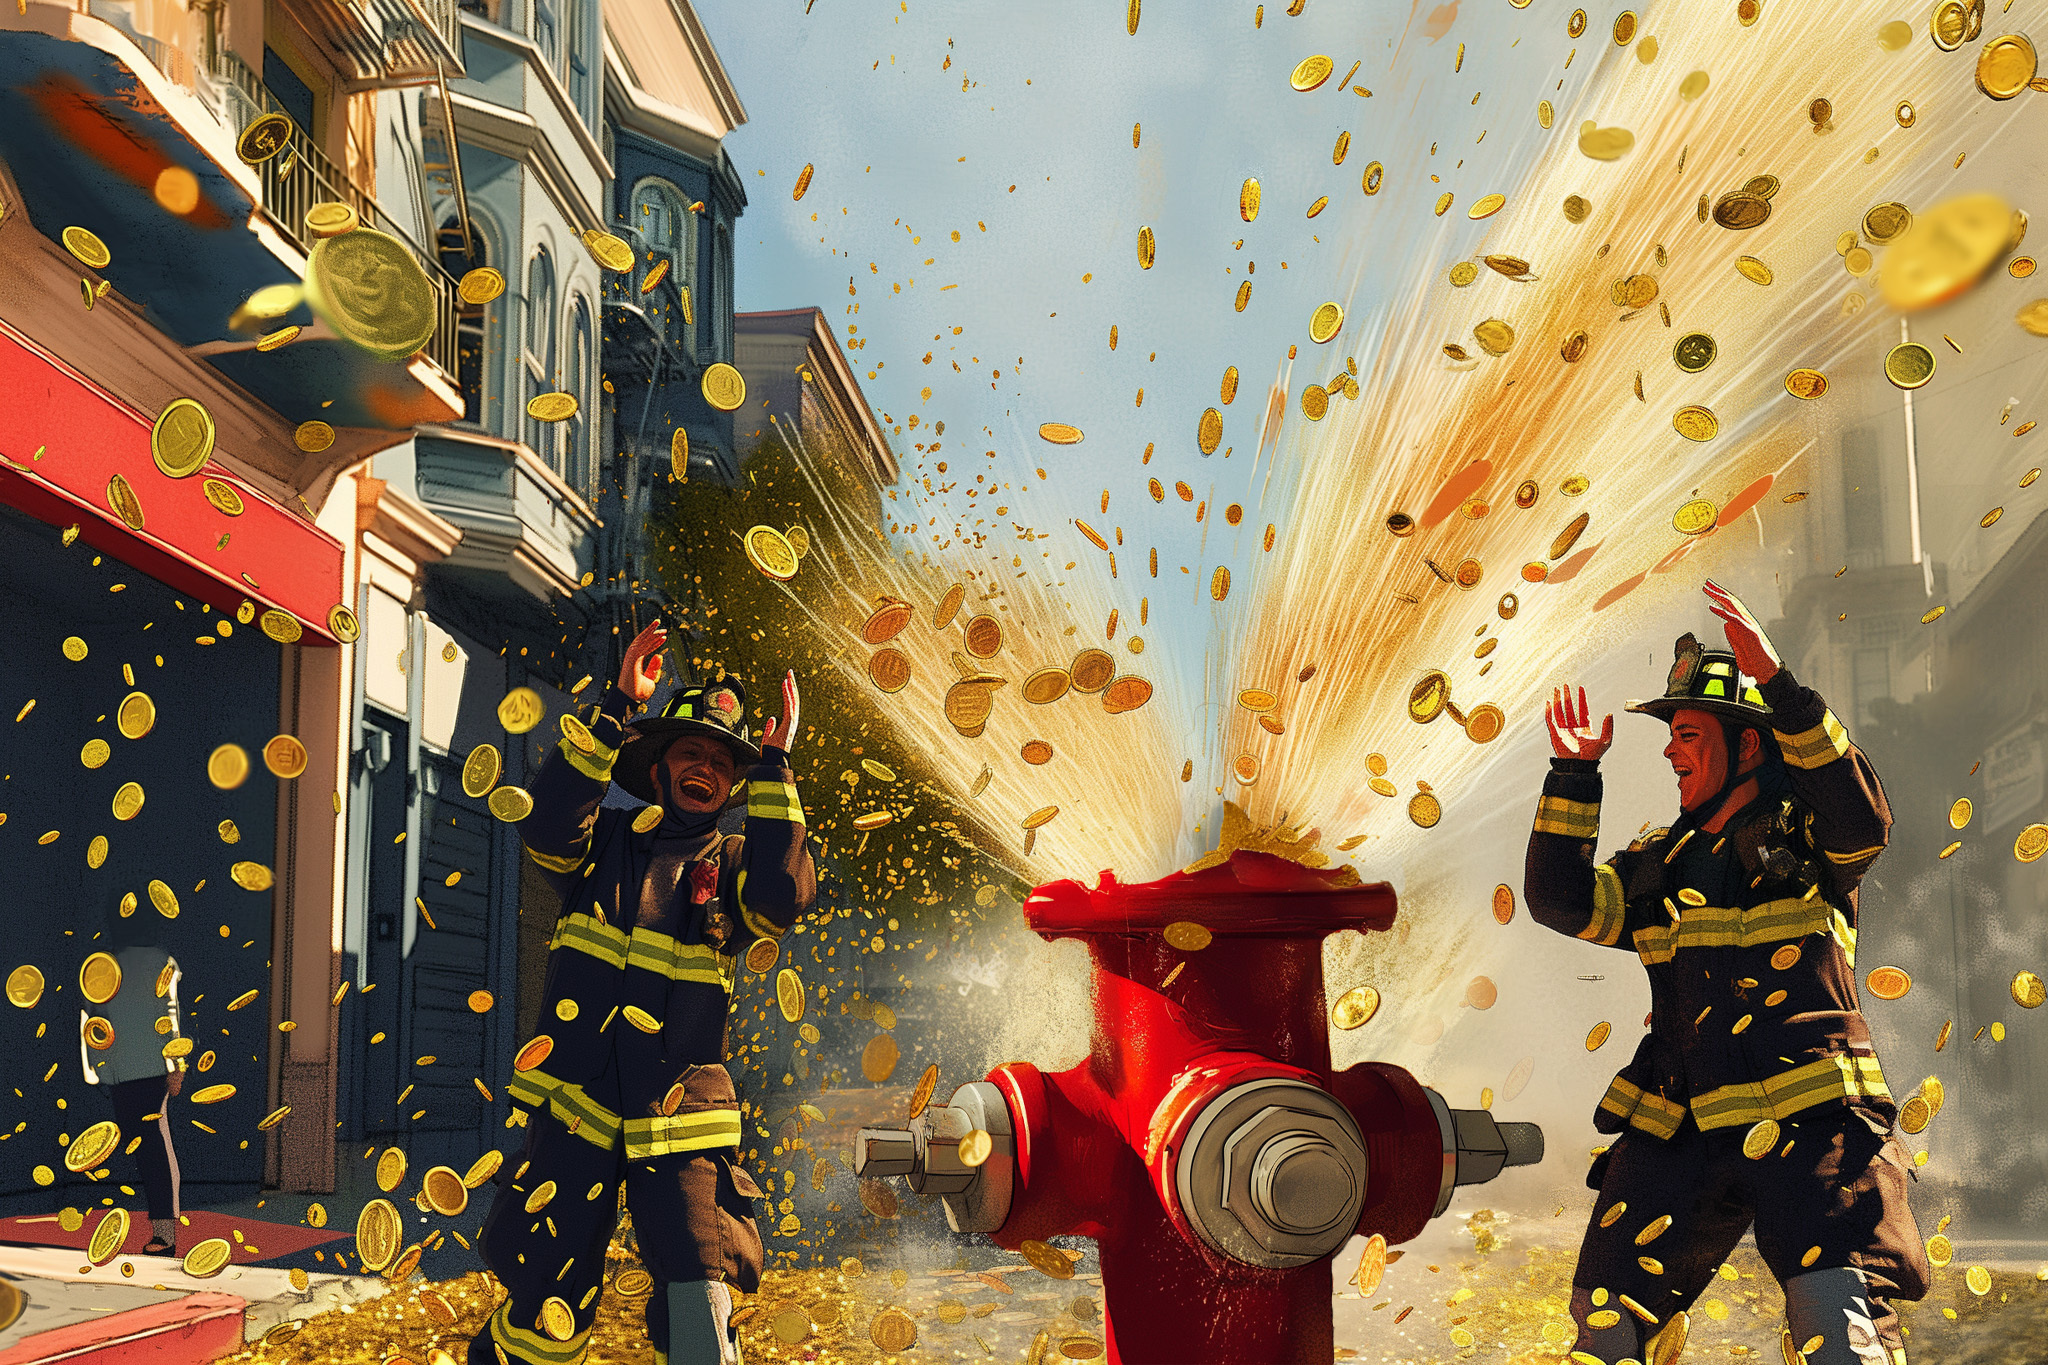 Two firefighters joyfully react as a burst fire hydrant spews a large cascade of gold coins on a city street, with charming old buildings in the background.